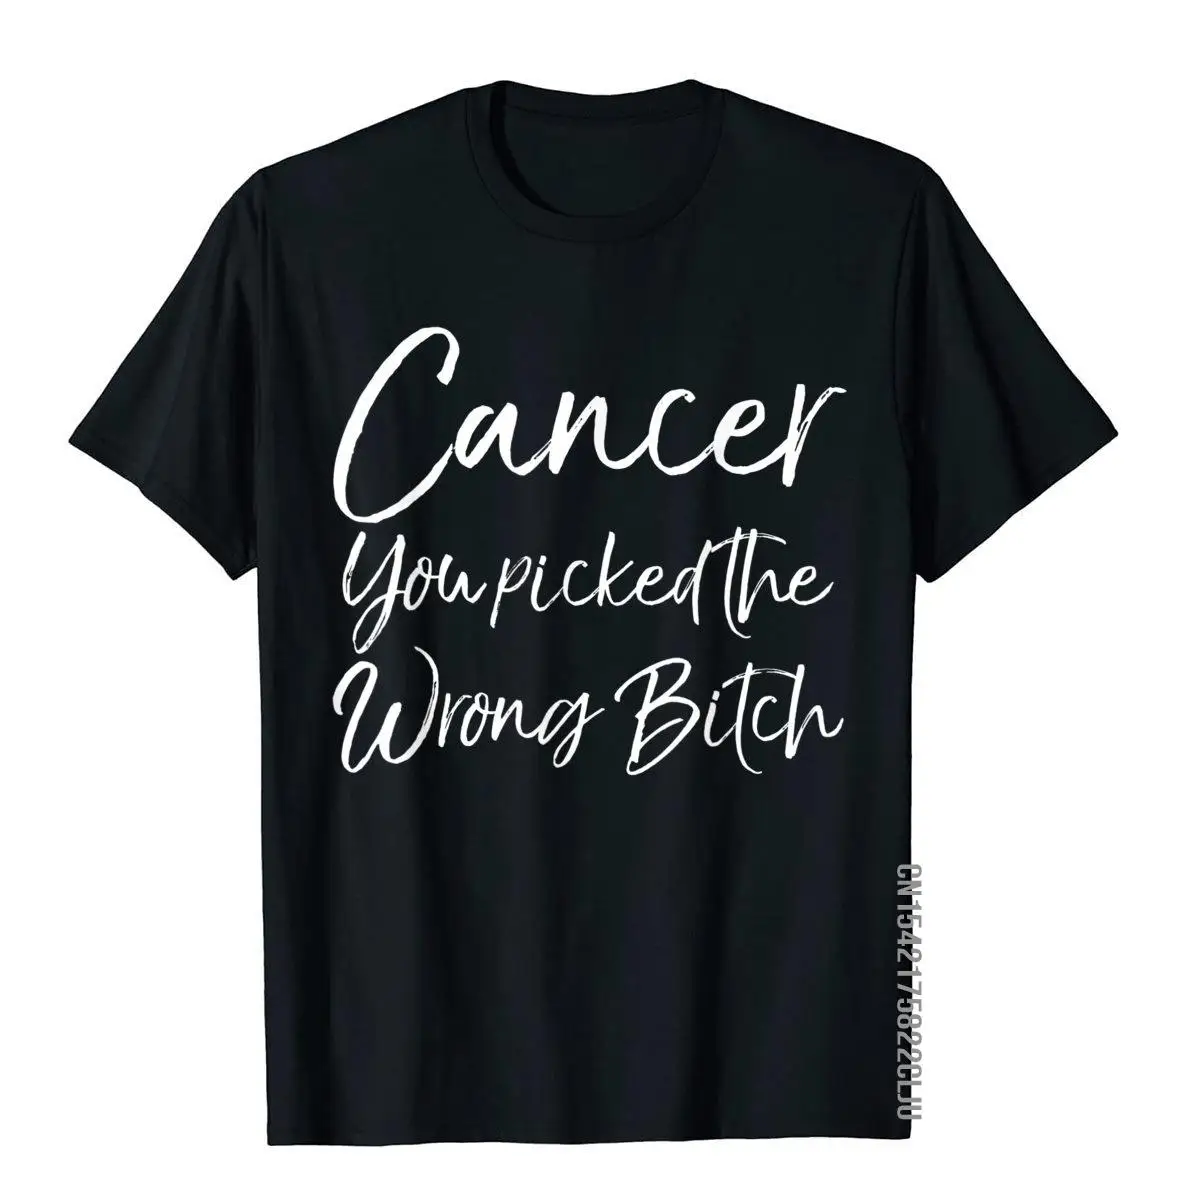 Funny Cancer Treatment Cancer You Picked The Wrong Bitch T-Shirt Cotton Men T Shirt Normal Tops Tees High Quality Cool